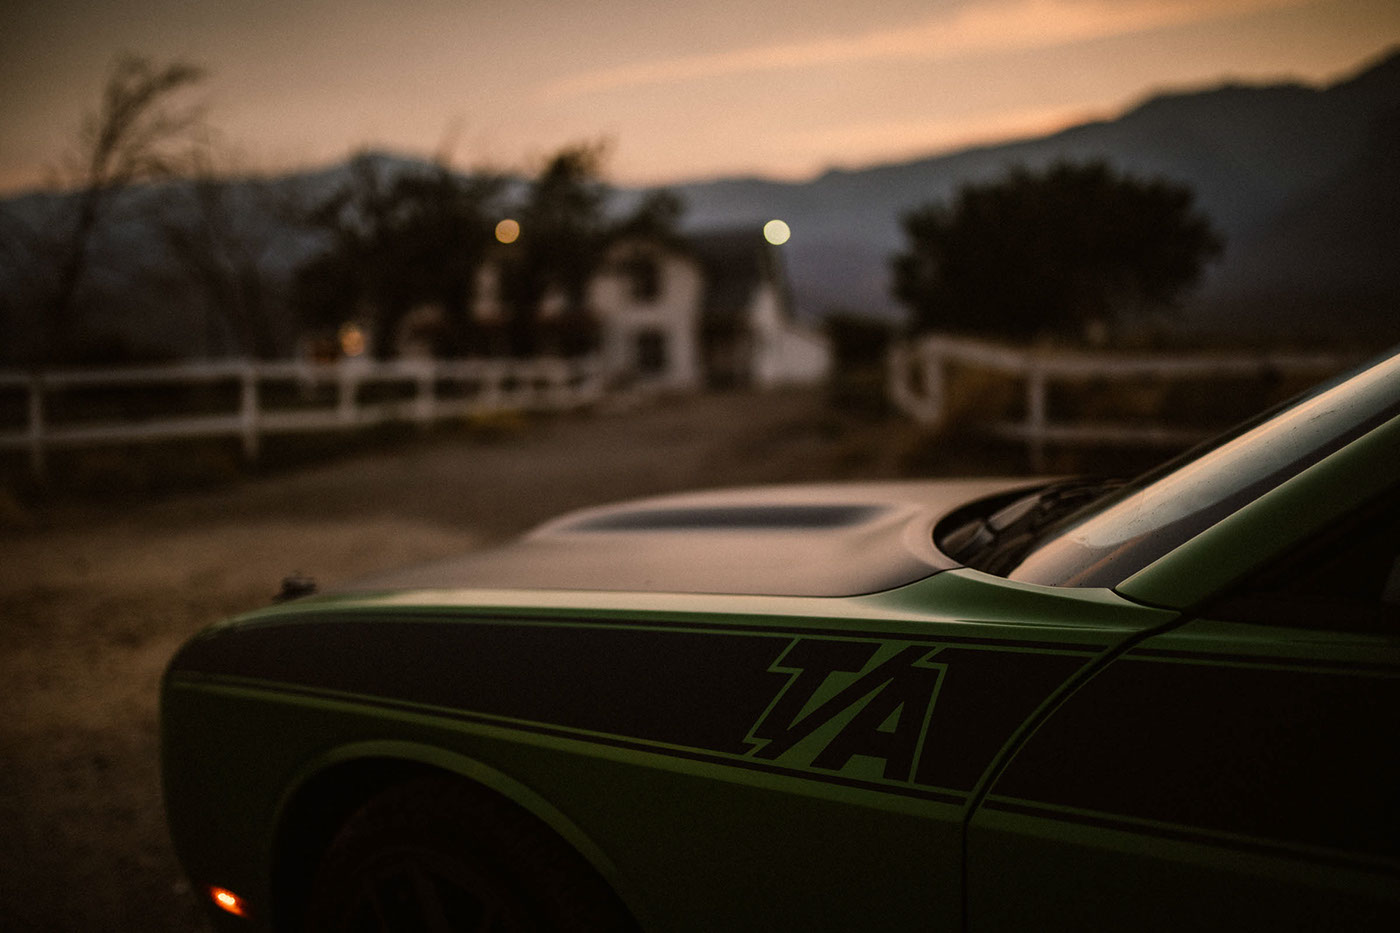 dodge challenger T/A desert hounted house dust dirty Moody atmosphere